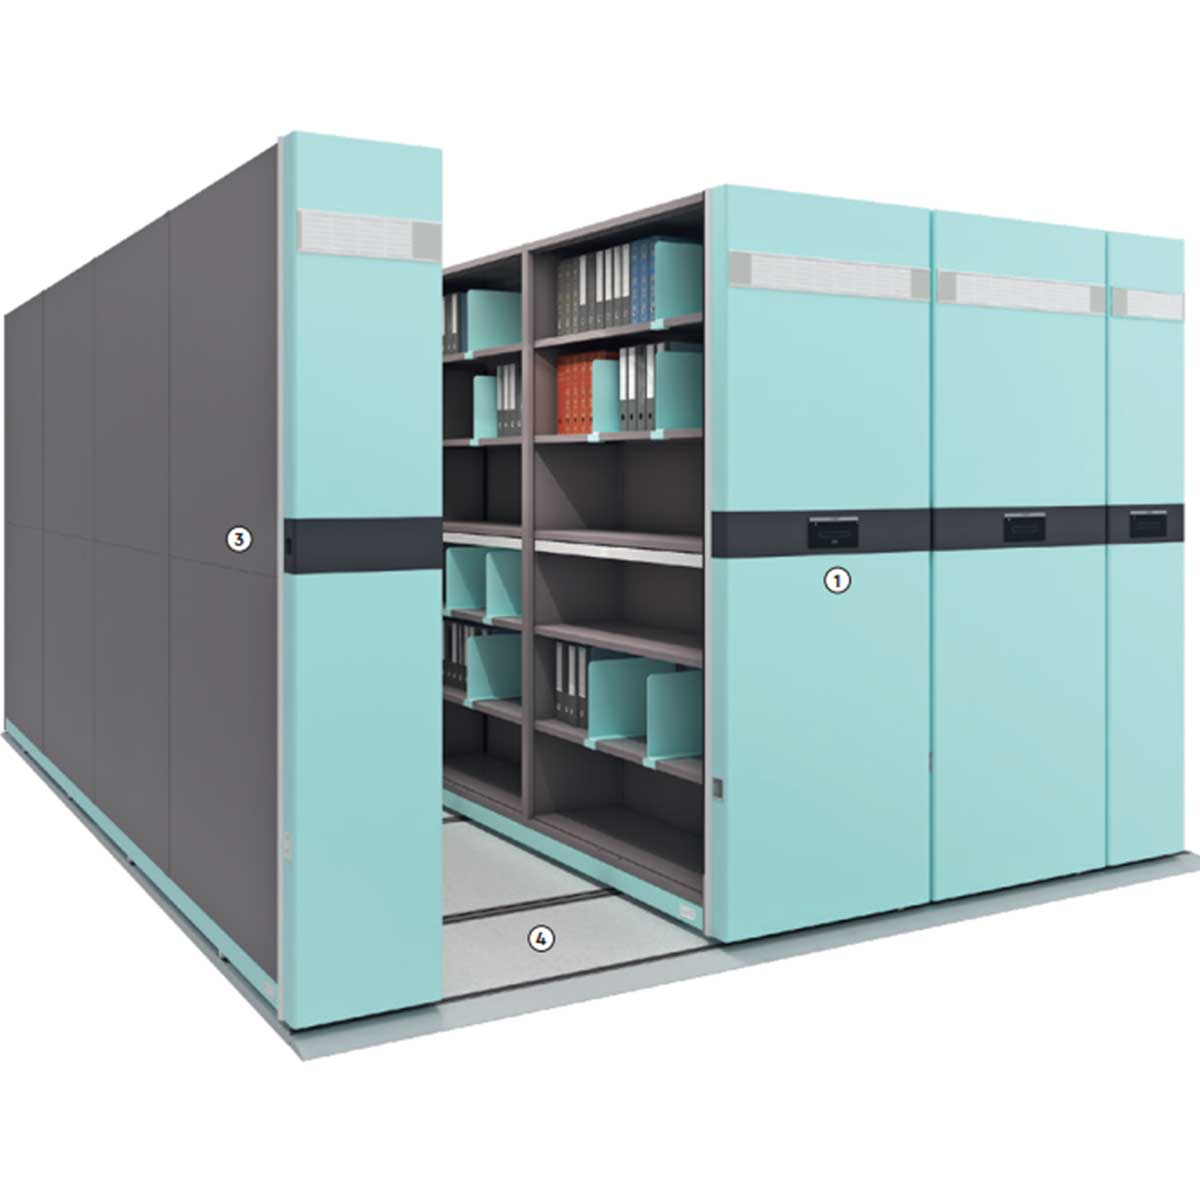 Mobile compactor storage Manufacturers, Suppliers in Tilak Marg